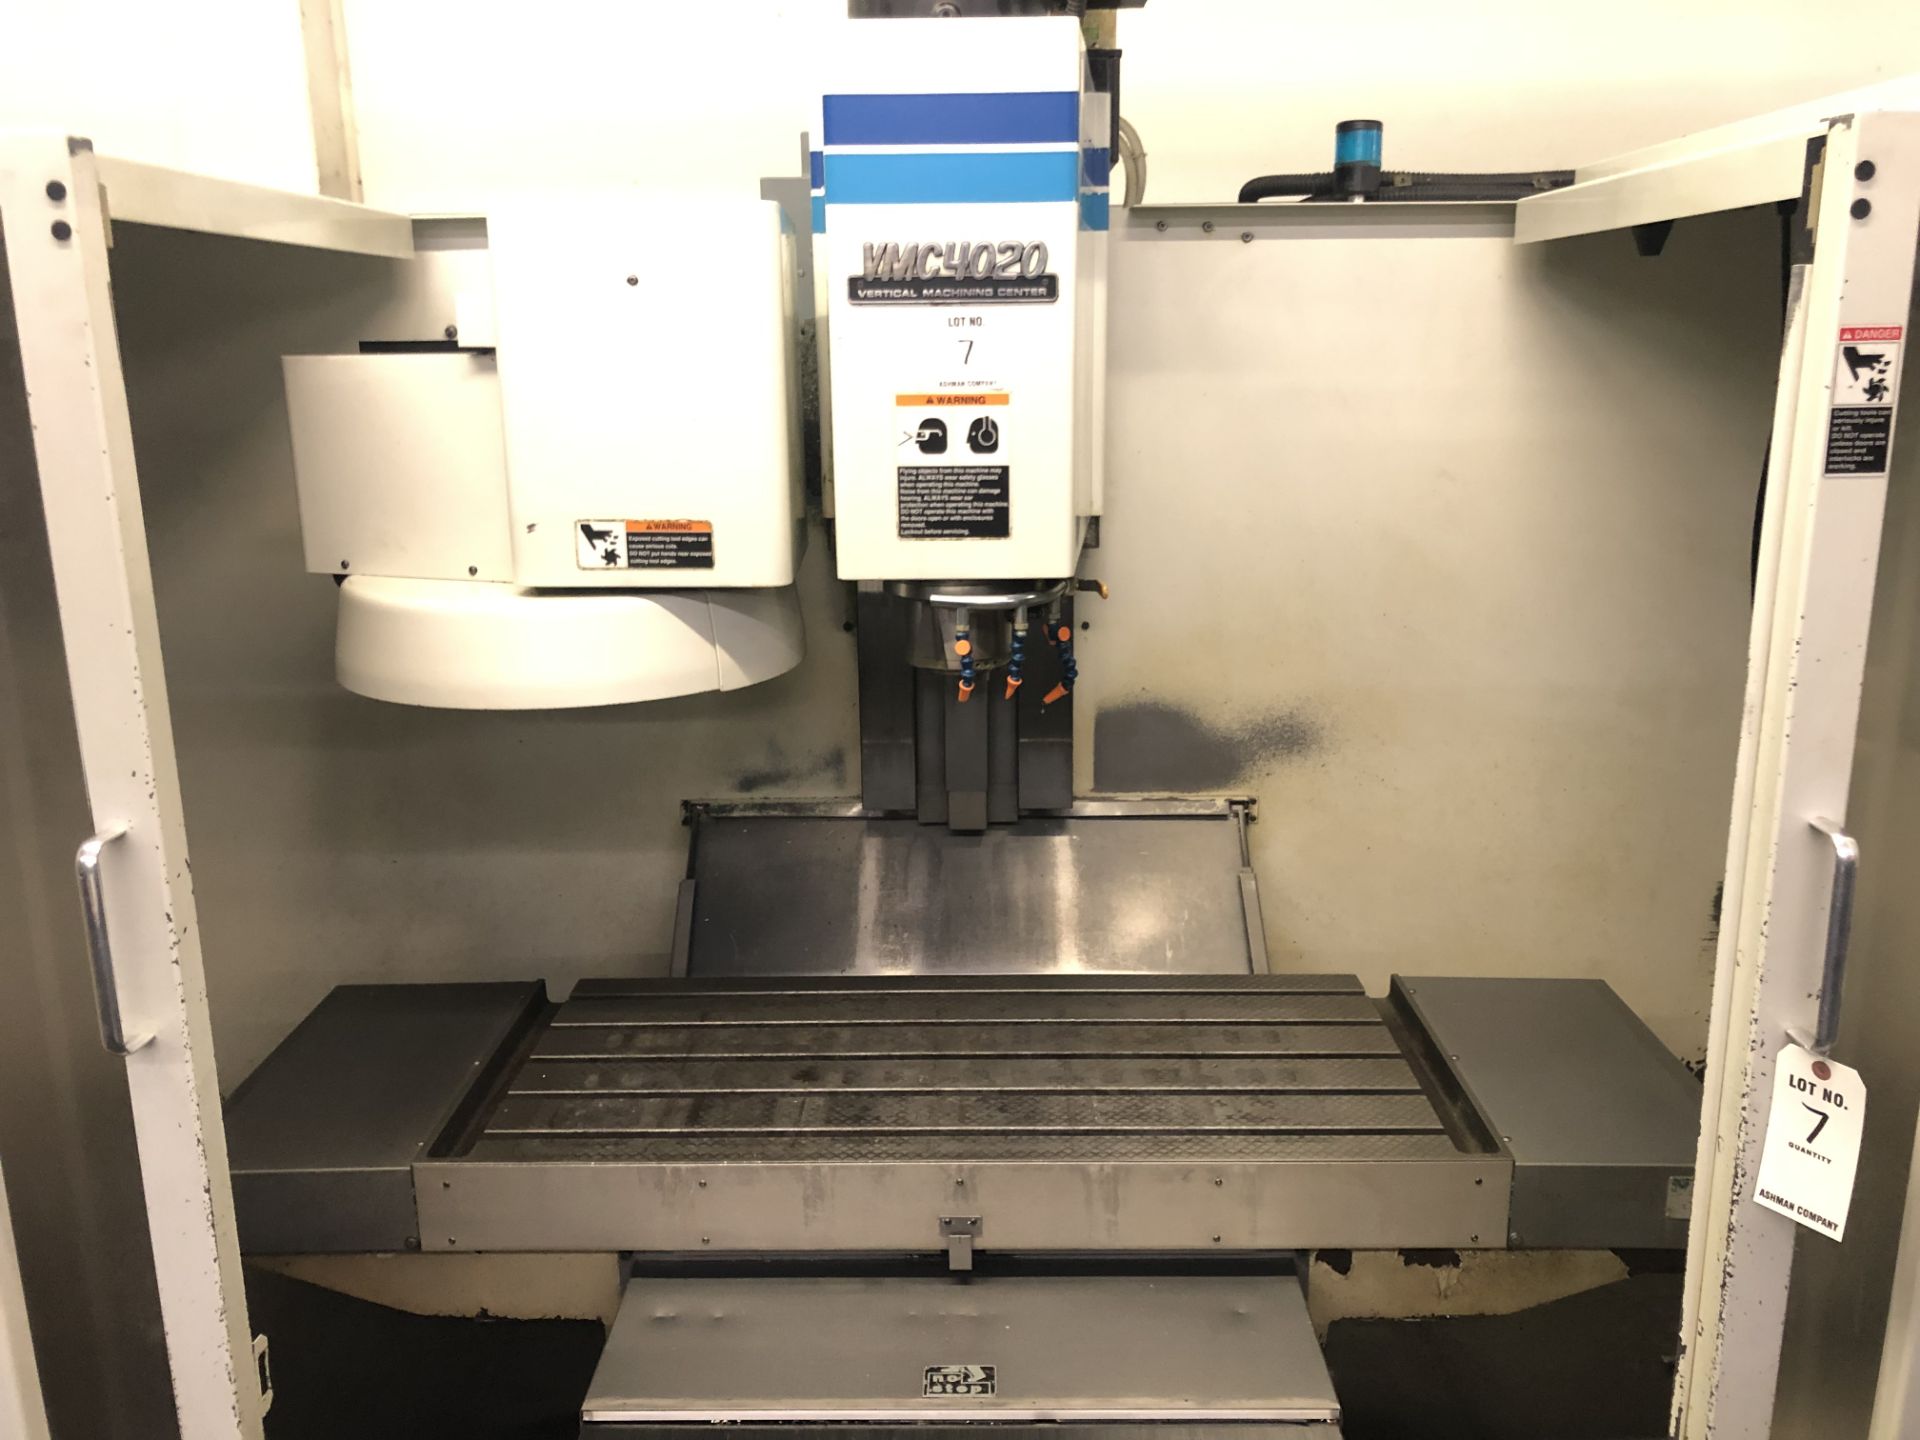 1997 Fadal 4020HT Vertical Machining Centers- 20 HP Spindle Motor, 10,000 RPM Spindle Speed, 21 Tool - Image 2 of 2